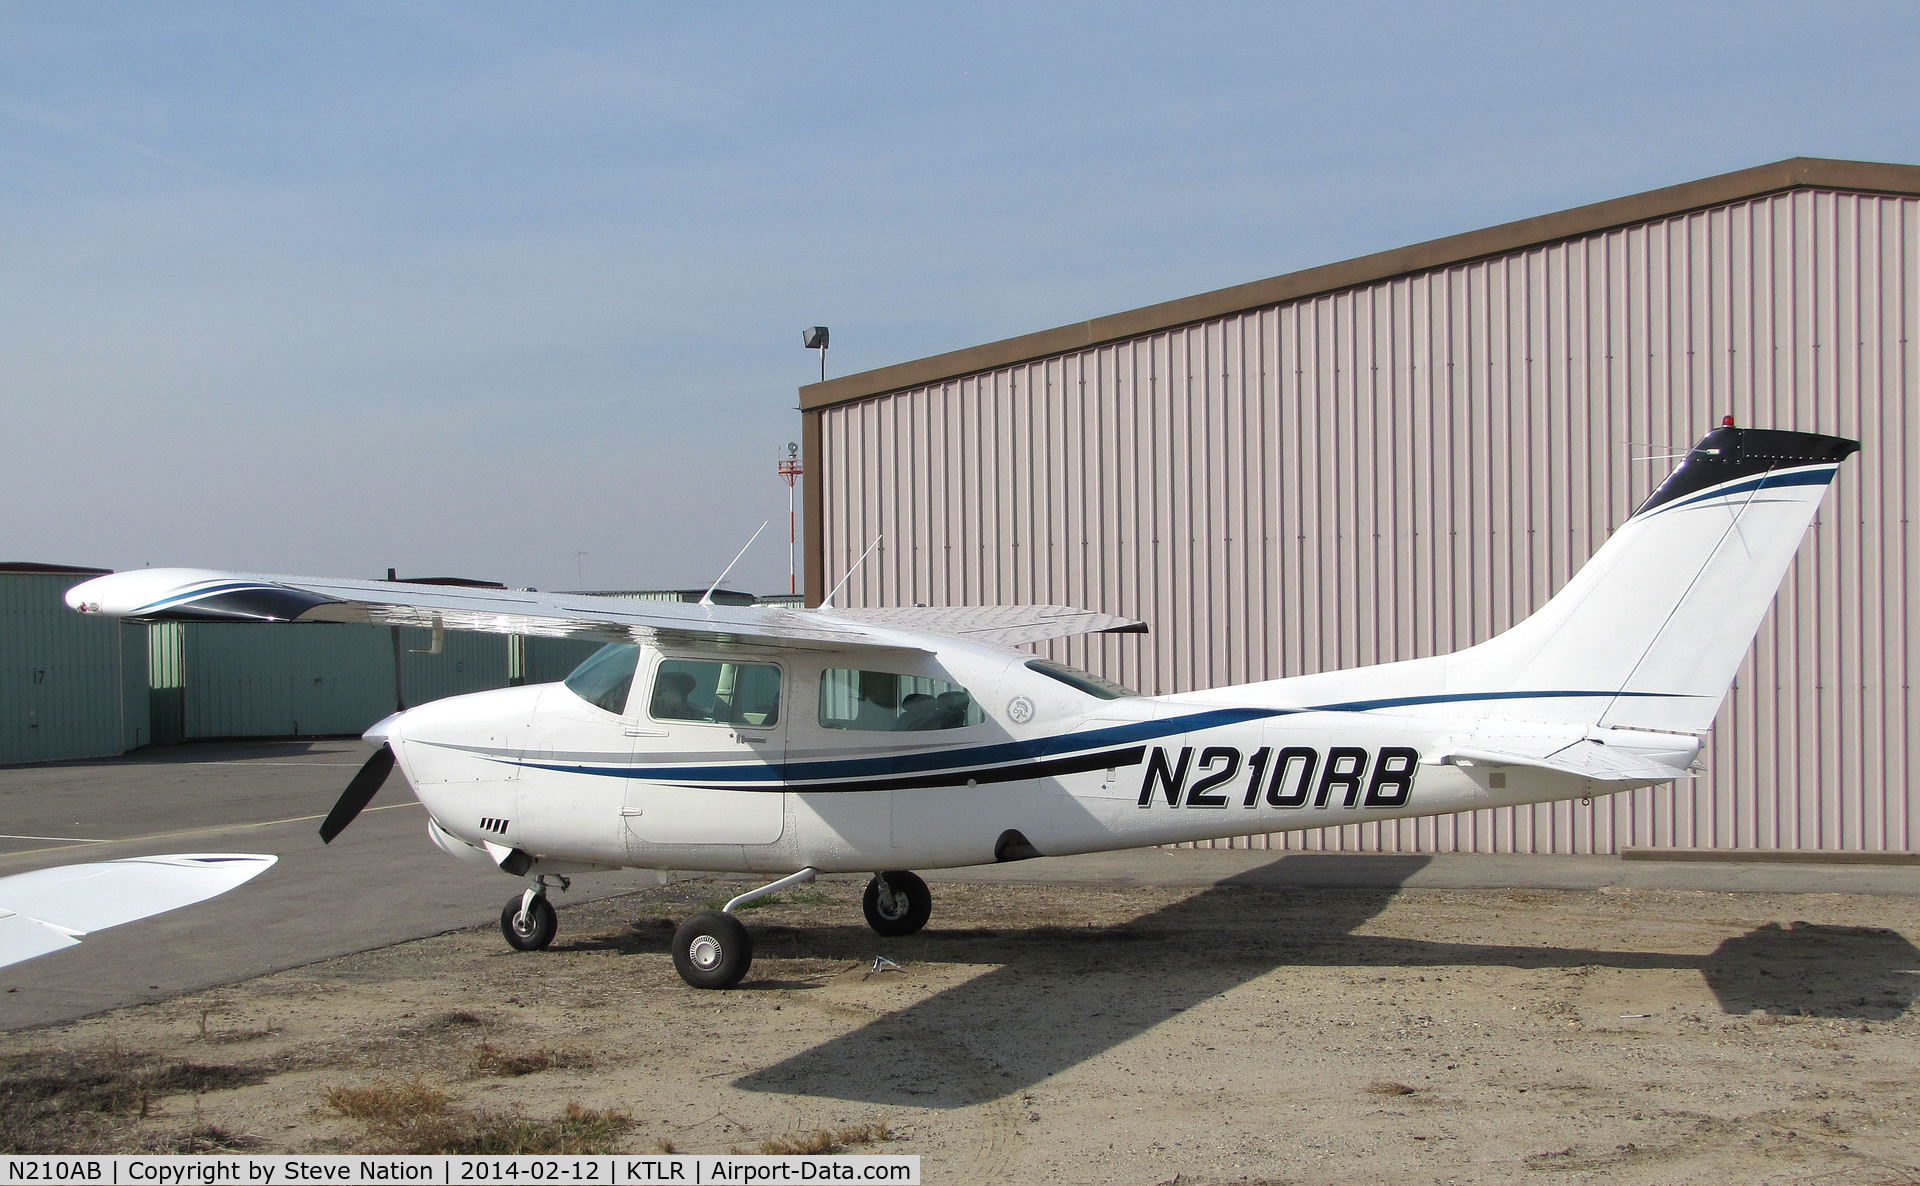 N210AB, 1981 Cessna T210N Turbo Centurion C/N 21064384, Esuom Corporation (Vernon, TX) Cessna T210N @ Mefford Field (Tulare, CA) for 2014 International Ag Expo